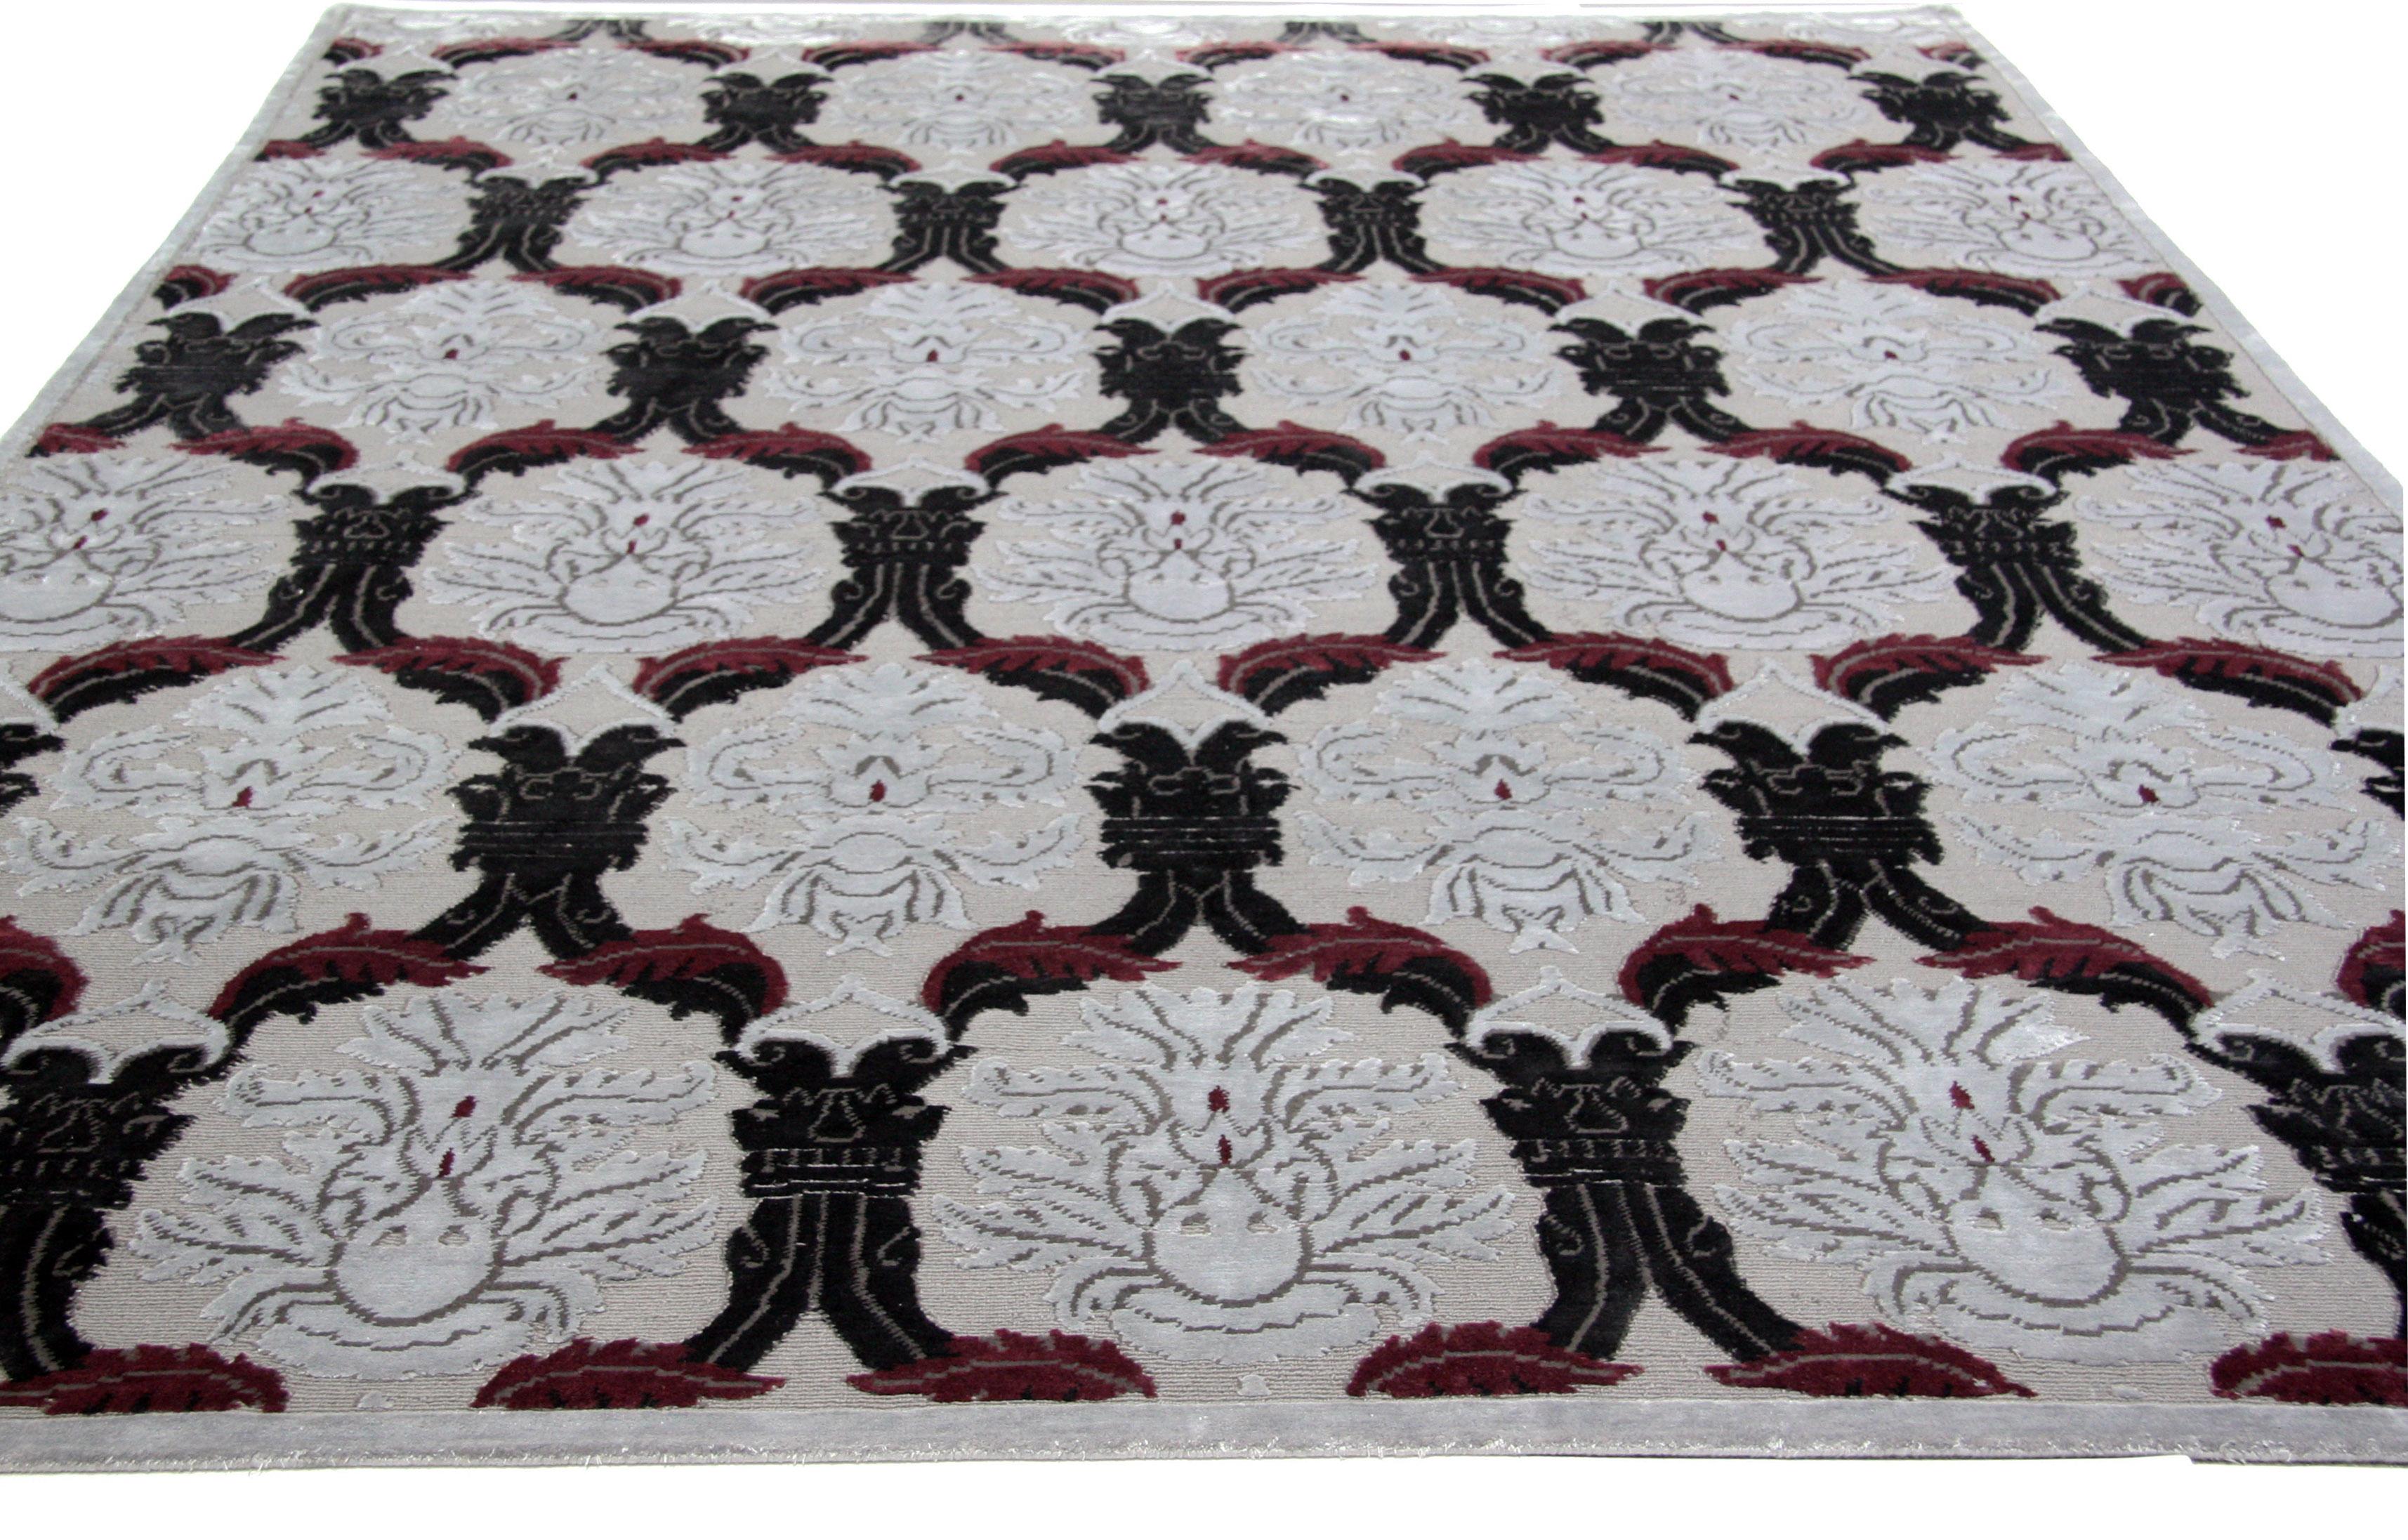 Shake up traditional room roles by bringing pattern from the walls to the floor with this damask-look wool area rug. Dark gray with black, white and fuchsia elements. Hand knotted in India.

Available in 8 x 10 and 9 x 12.